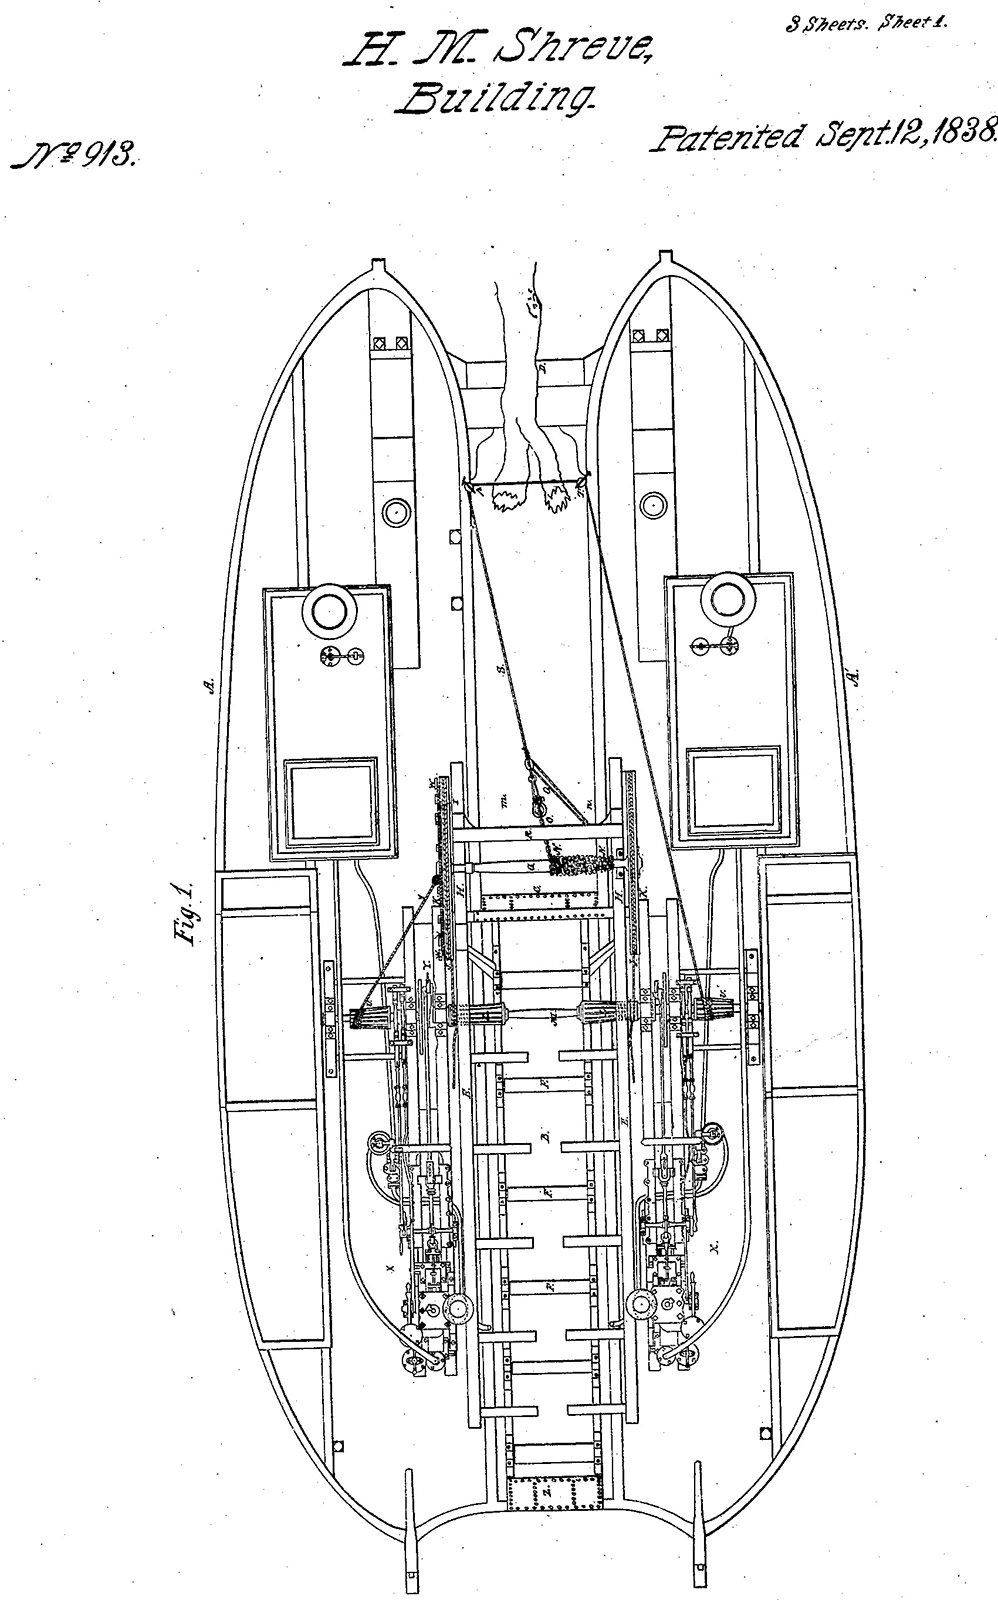 Drawing in black on white paper of Snag boat patent